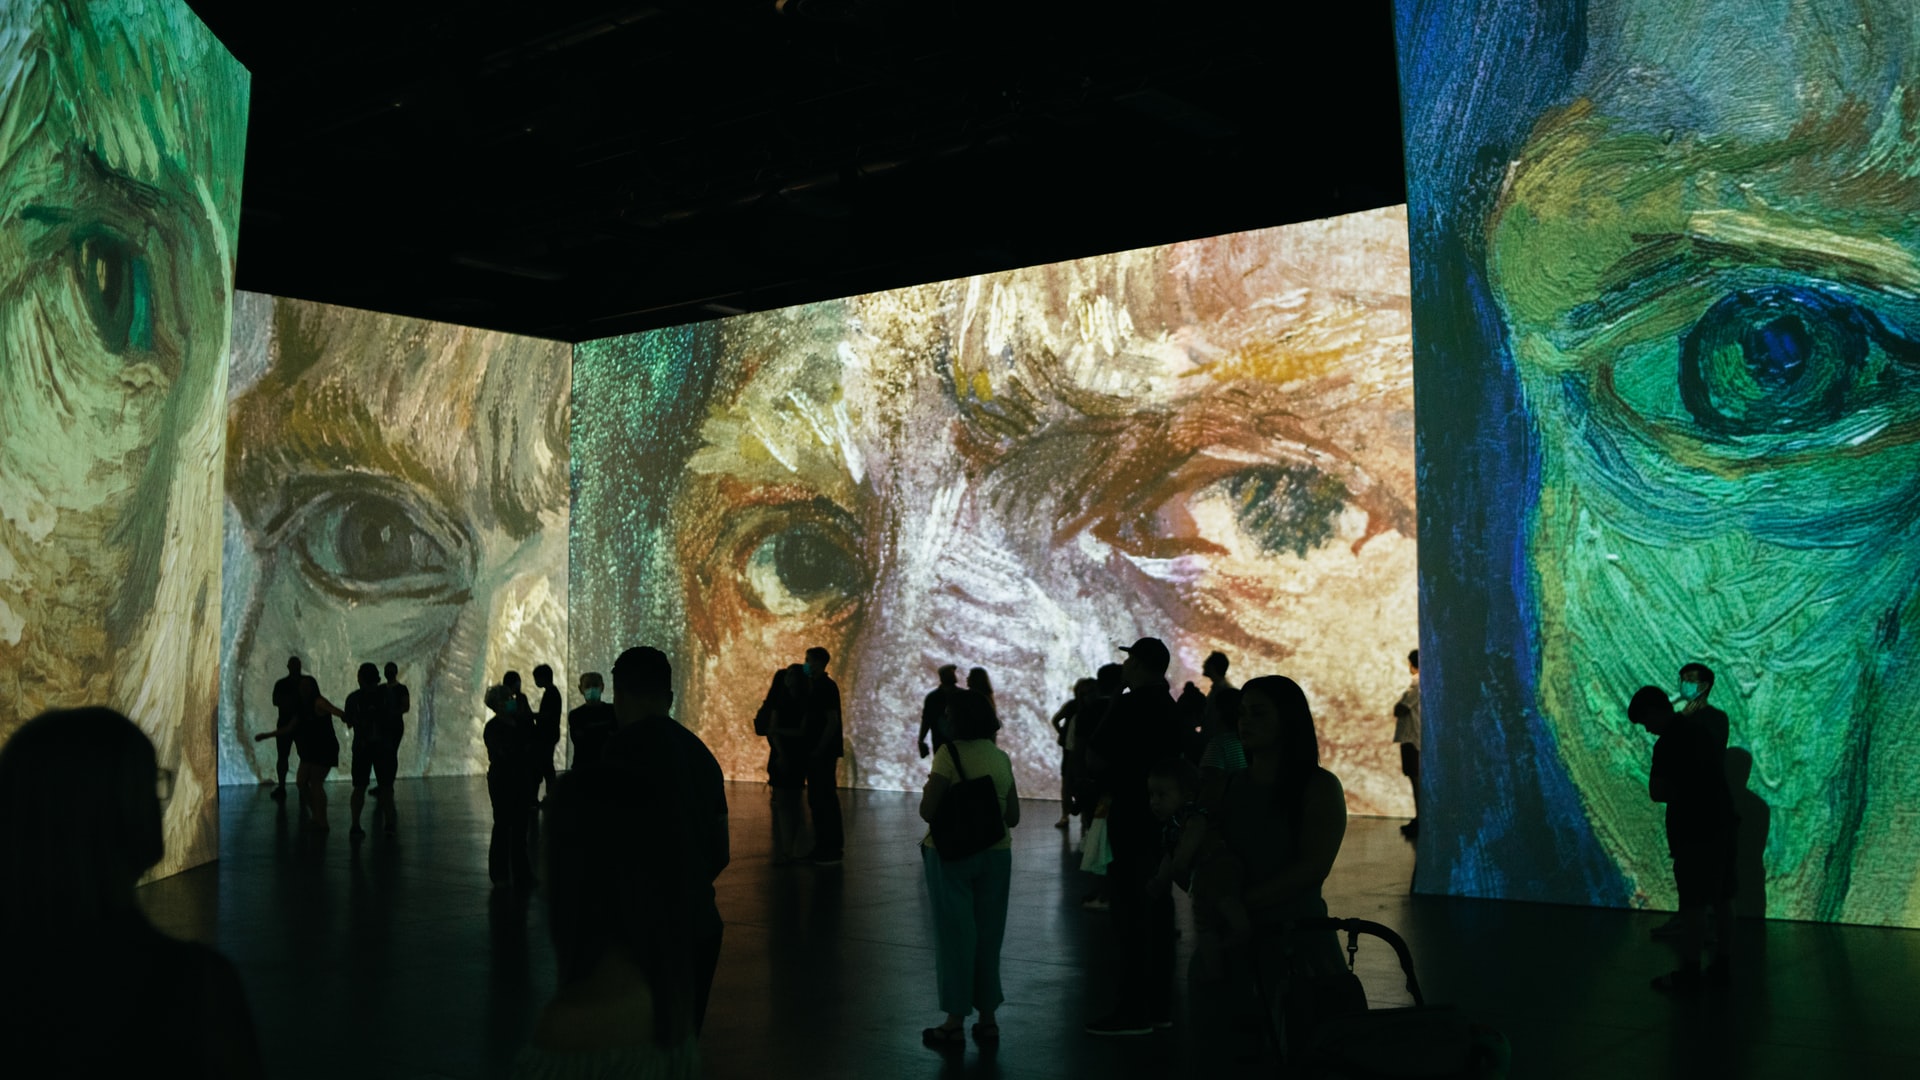 Buy Tickets Now for the Immersive Van Gogh Exhibition